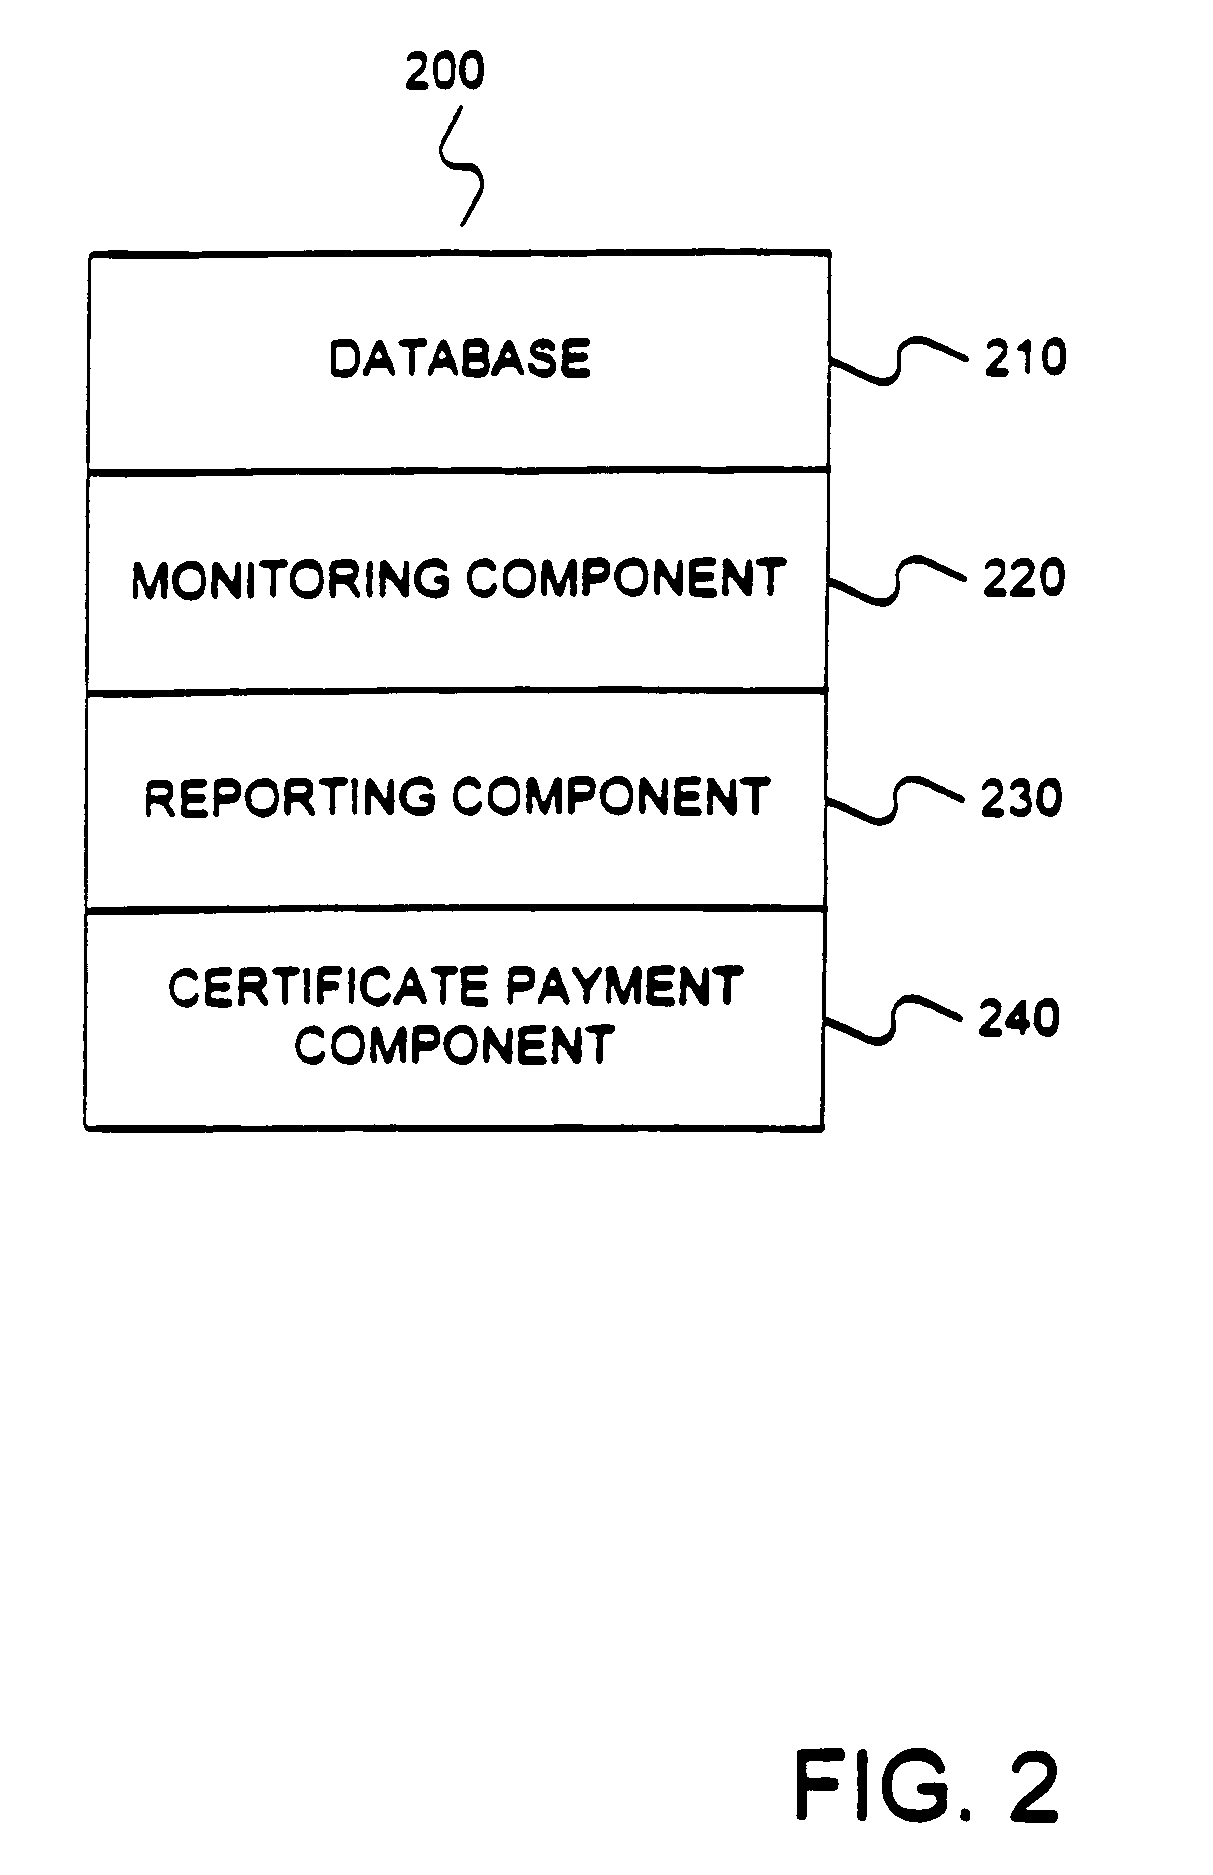 Reference pools as credit enhancements